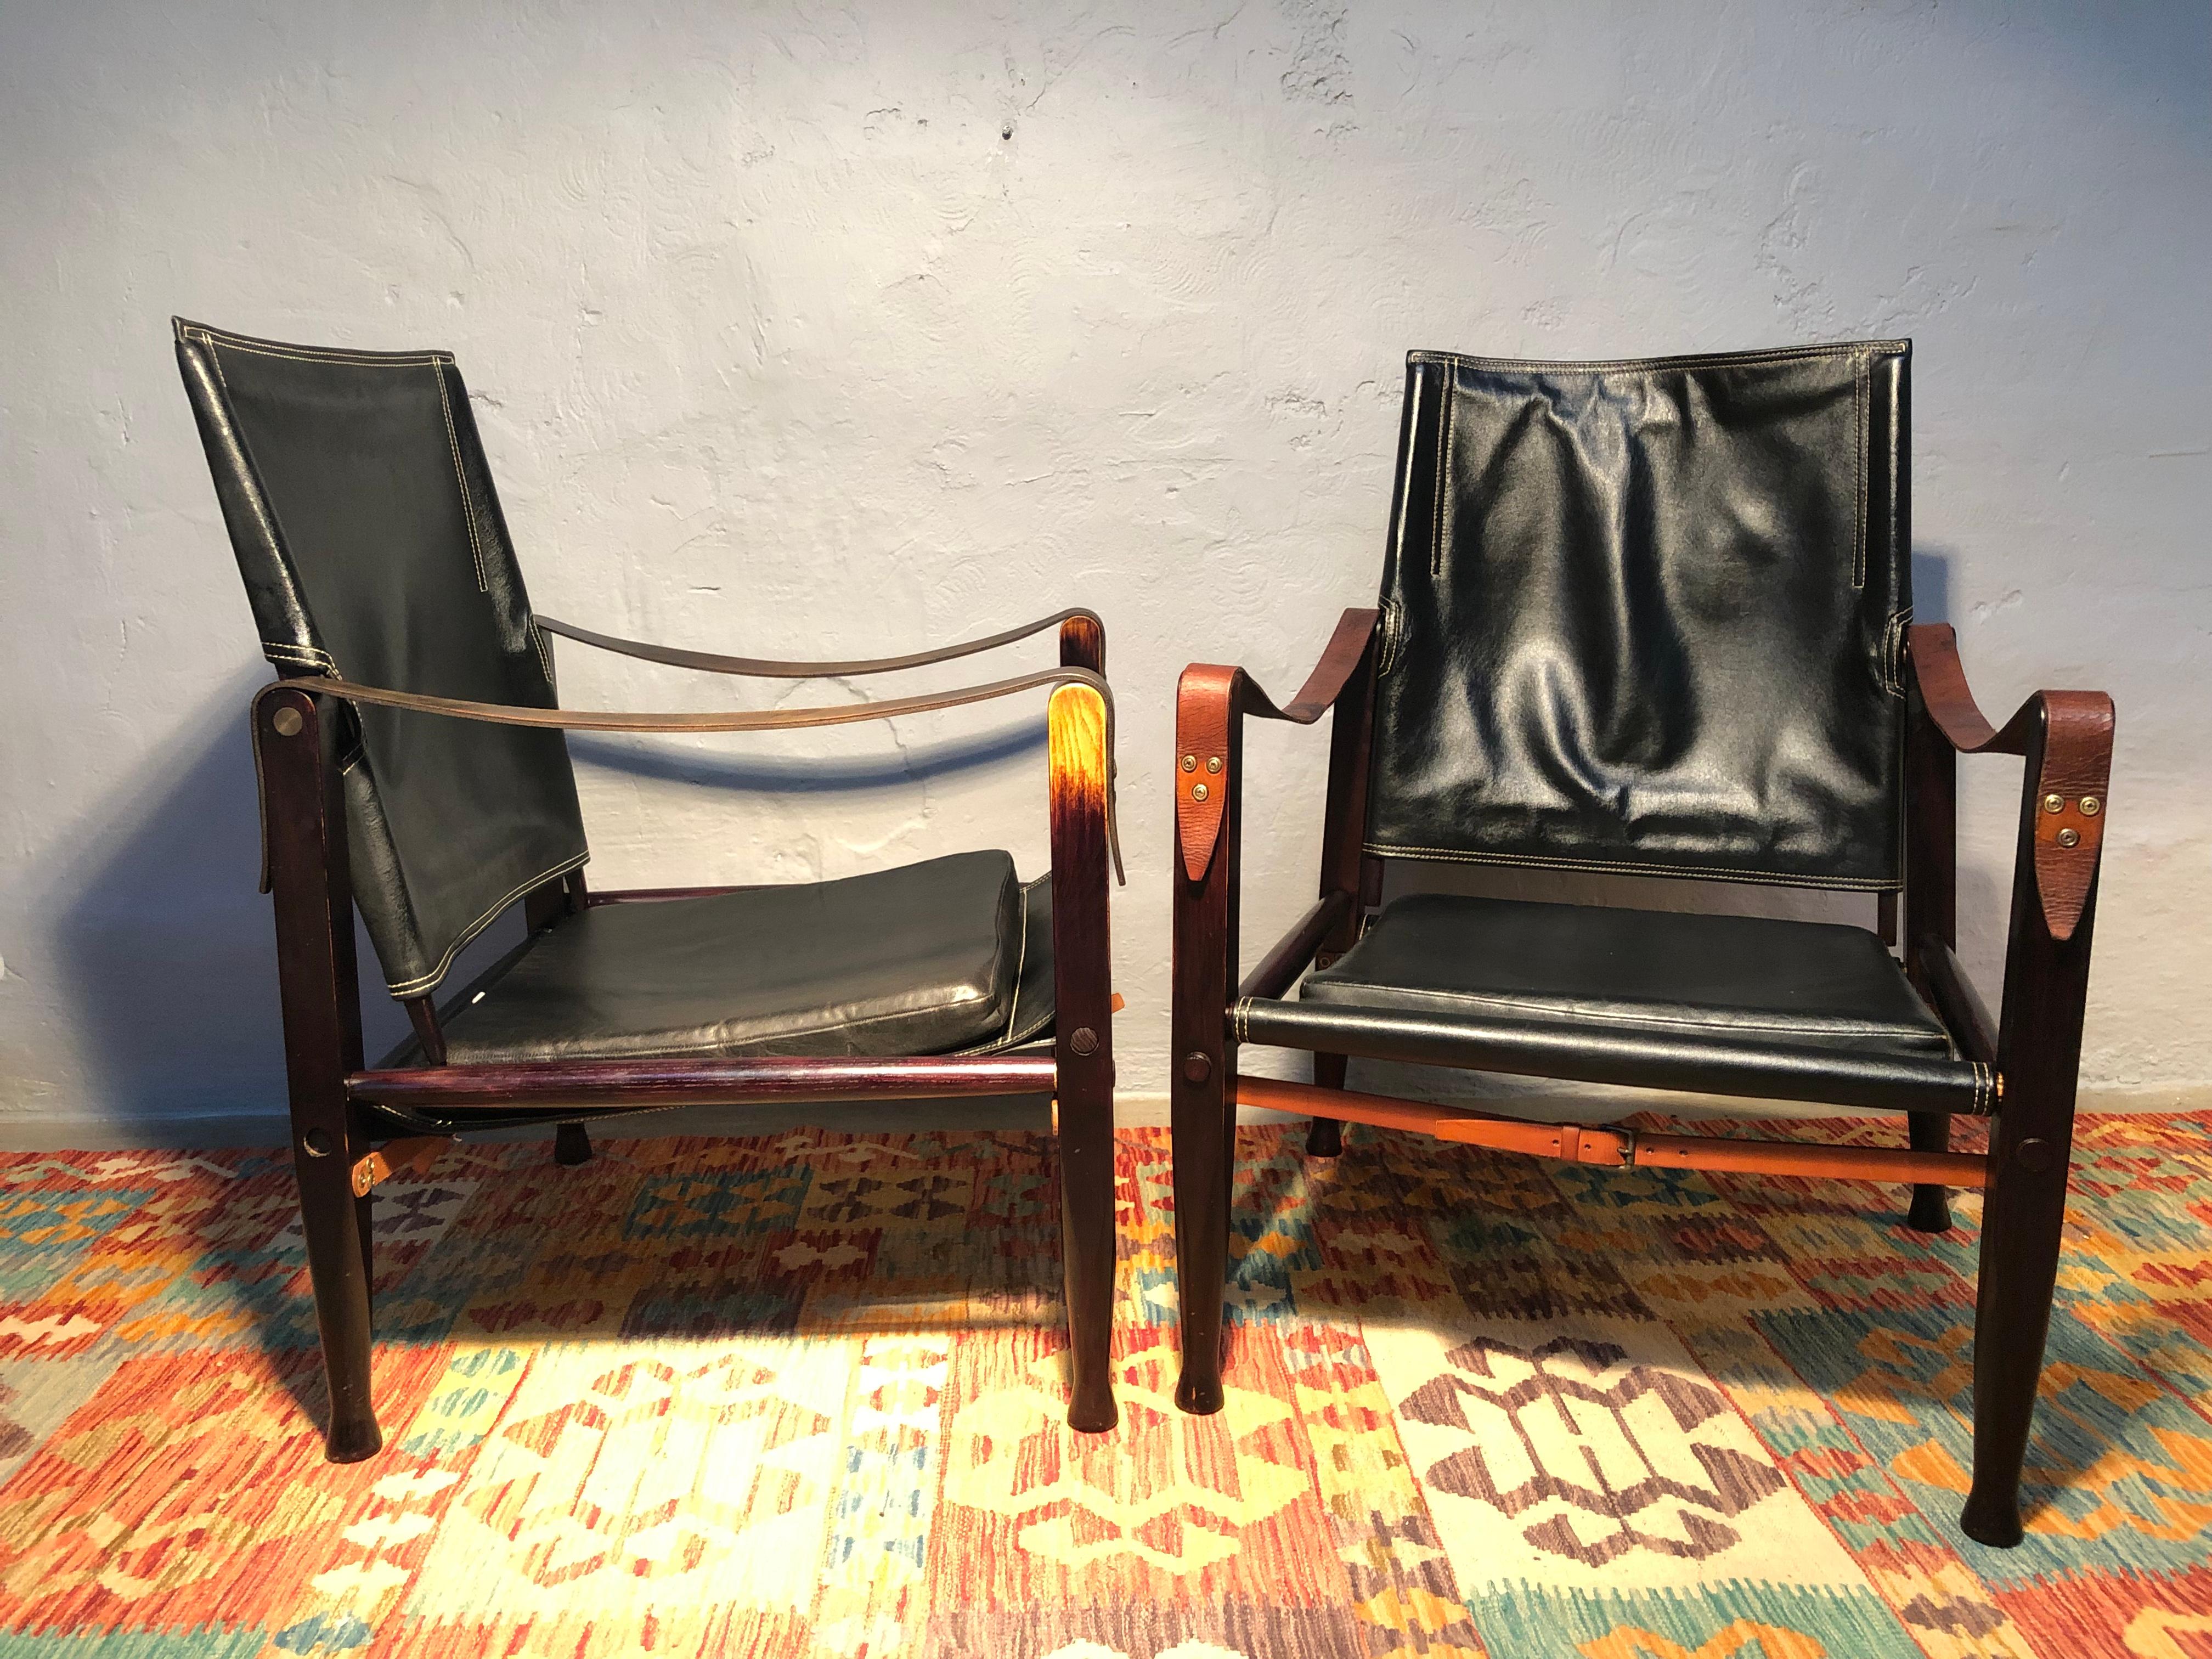 A pair of safari chairs designed by Kaare Klint for Rud Rasmussen furniture makers of Copenhagen in great original condition.
Kaare Klint designed the safari chairs in 1933.
These iconic chairs are made of black stained ash and leather. 
They have